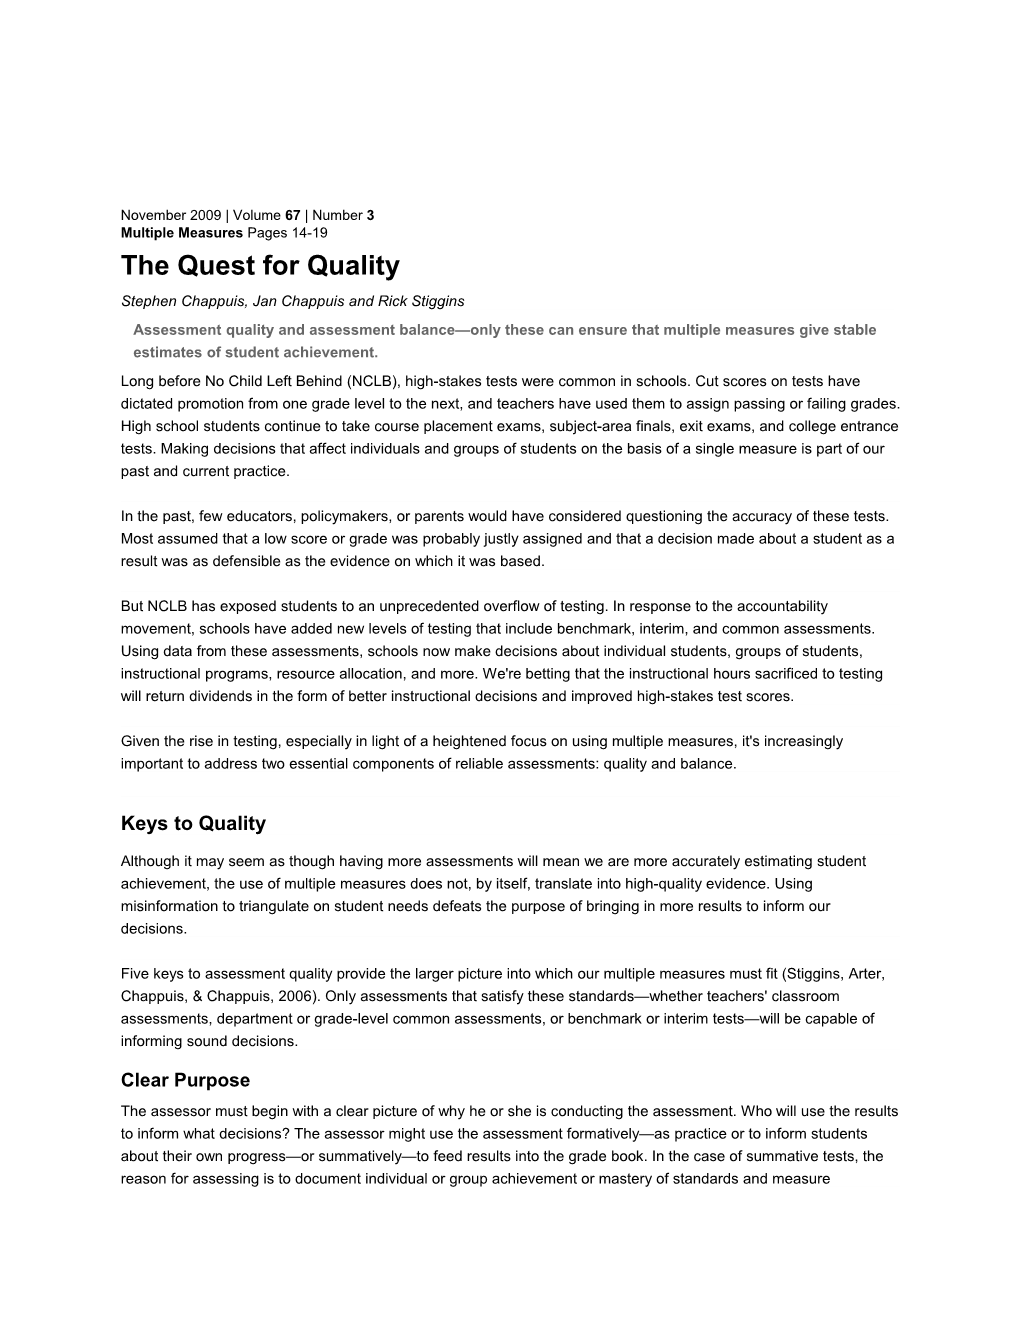 The Quest for Quality